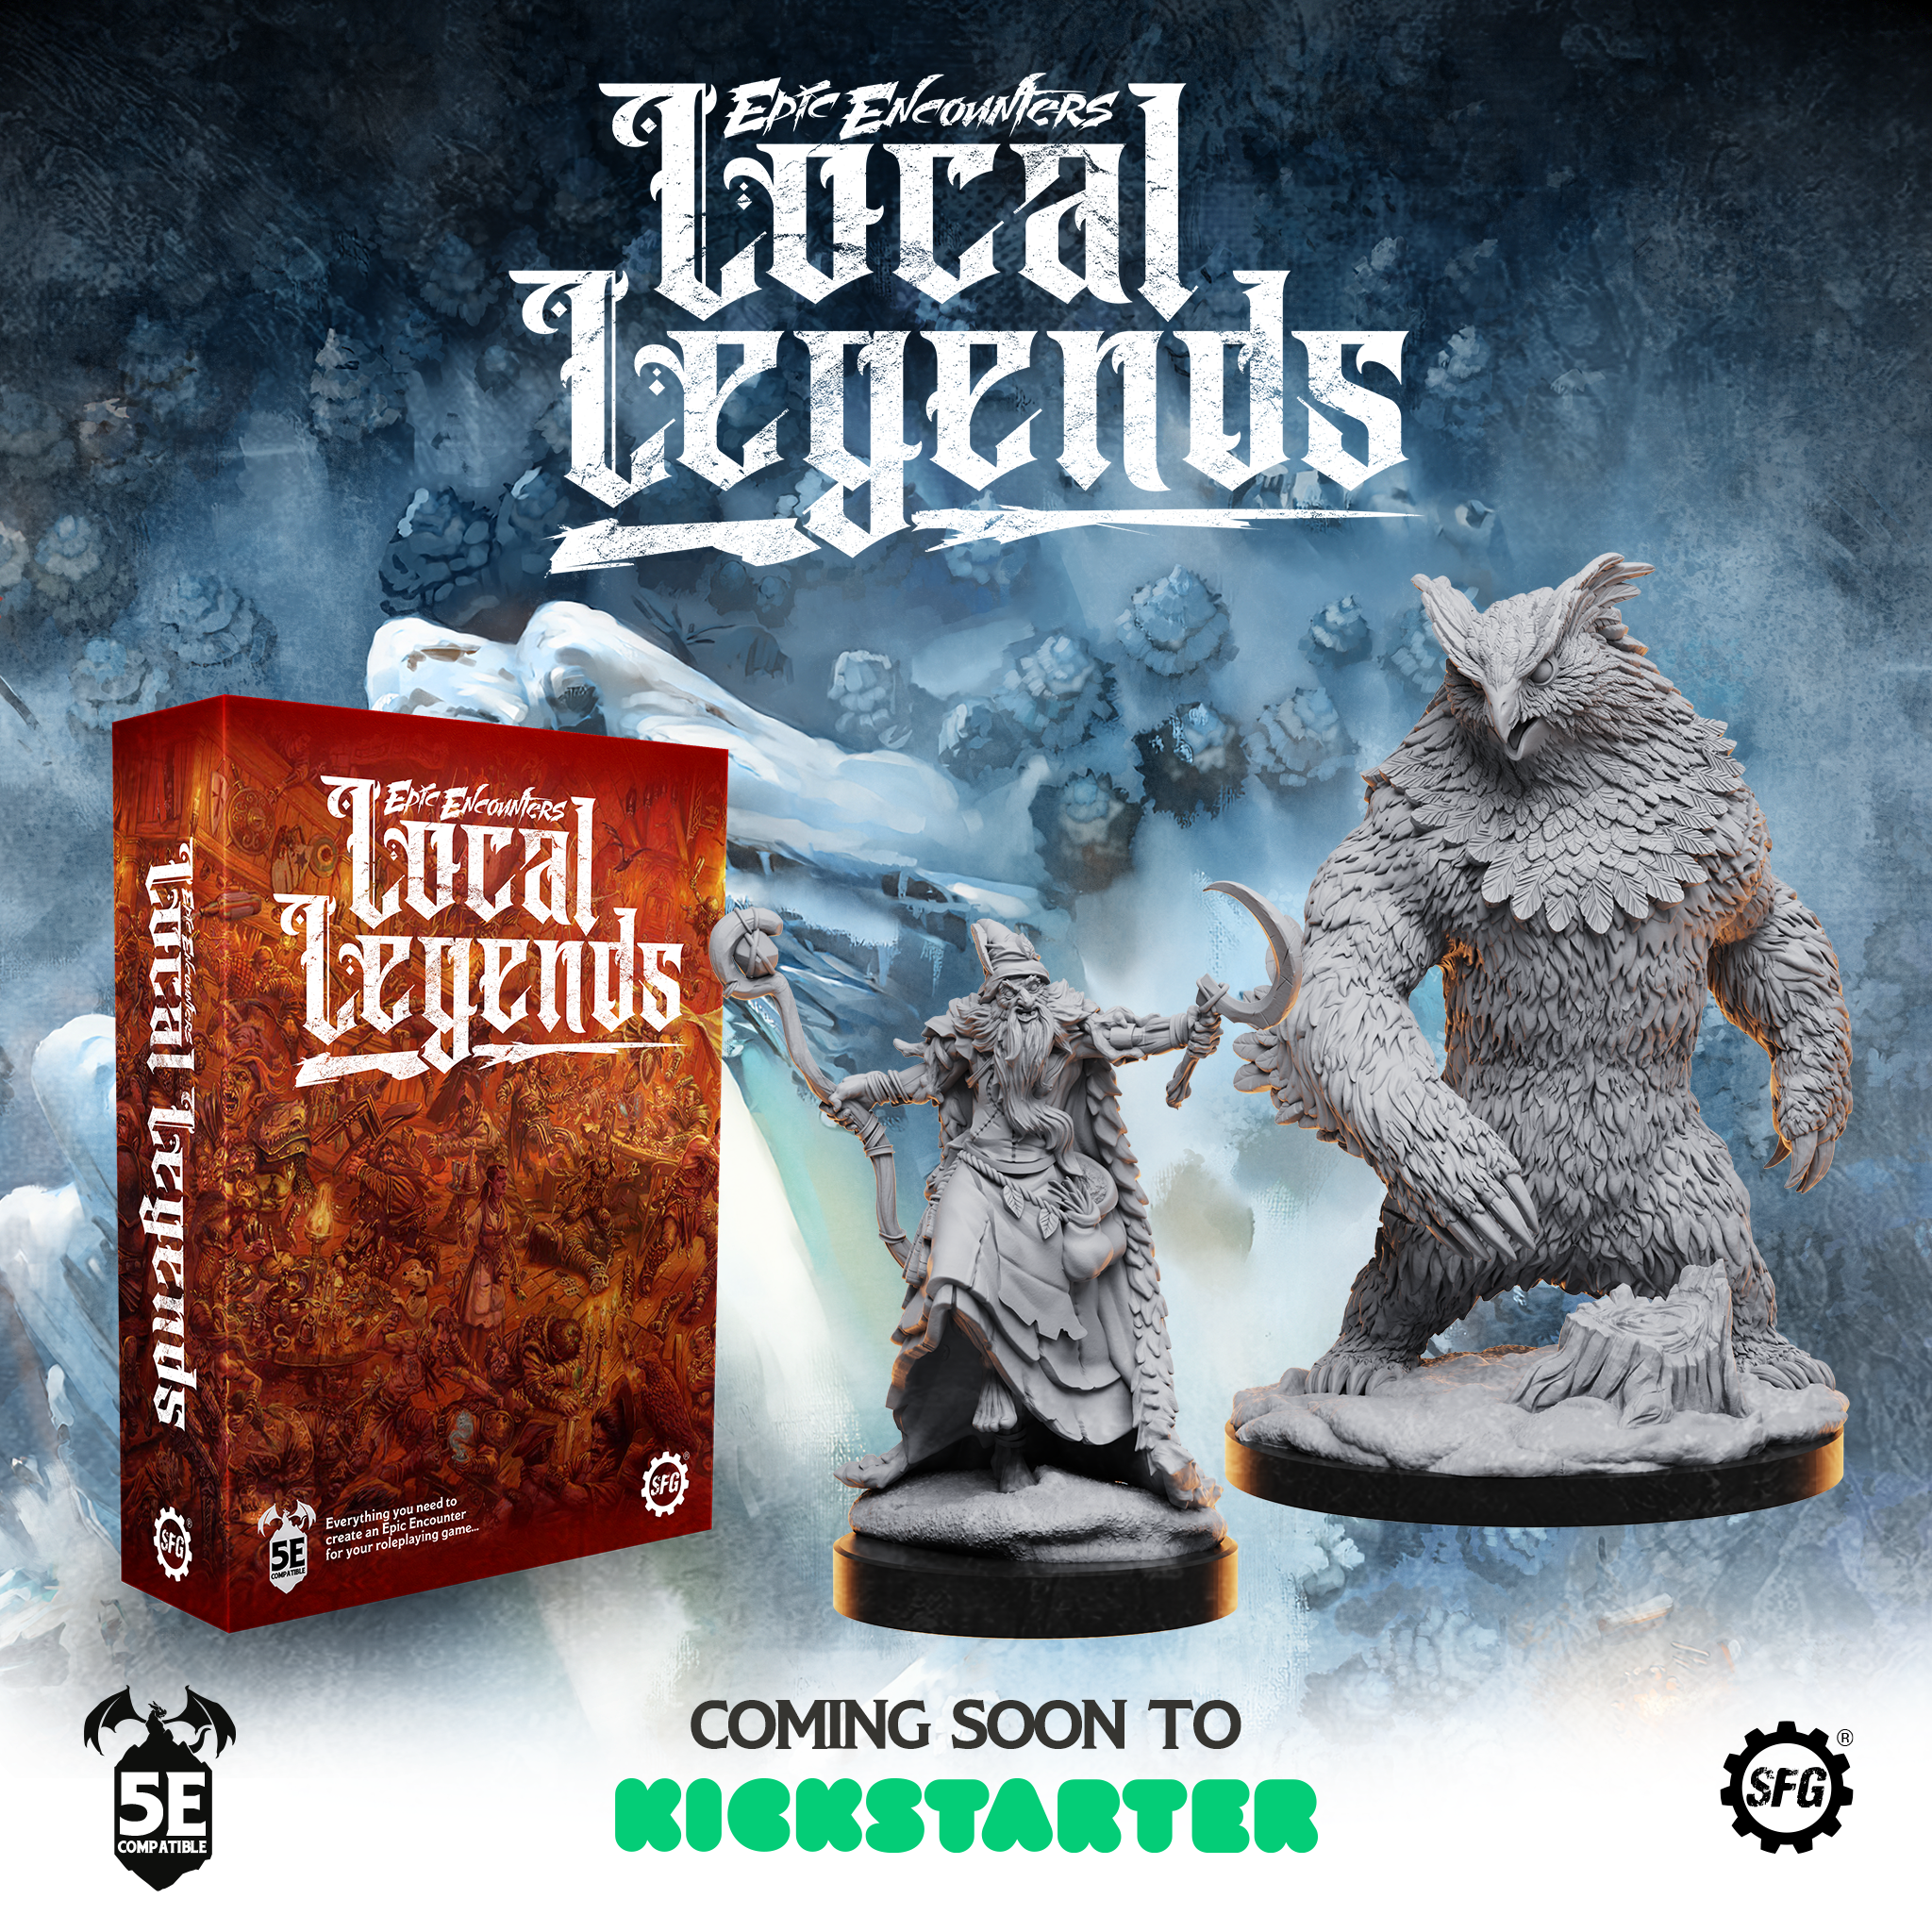 Epic Encounters Local Legends Coming Soon - Steamforged Games